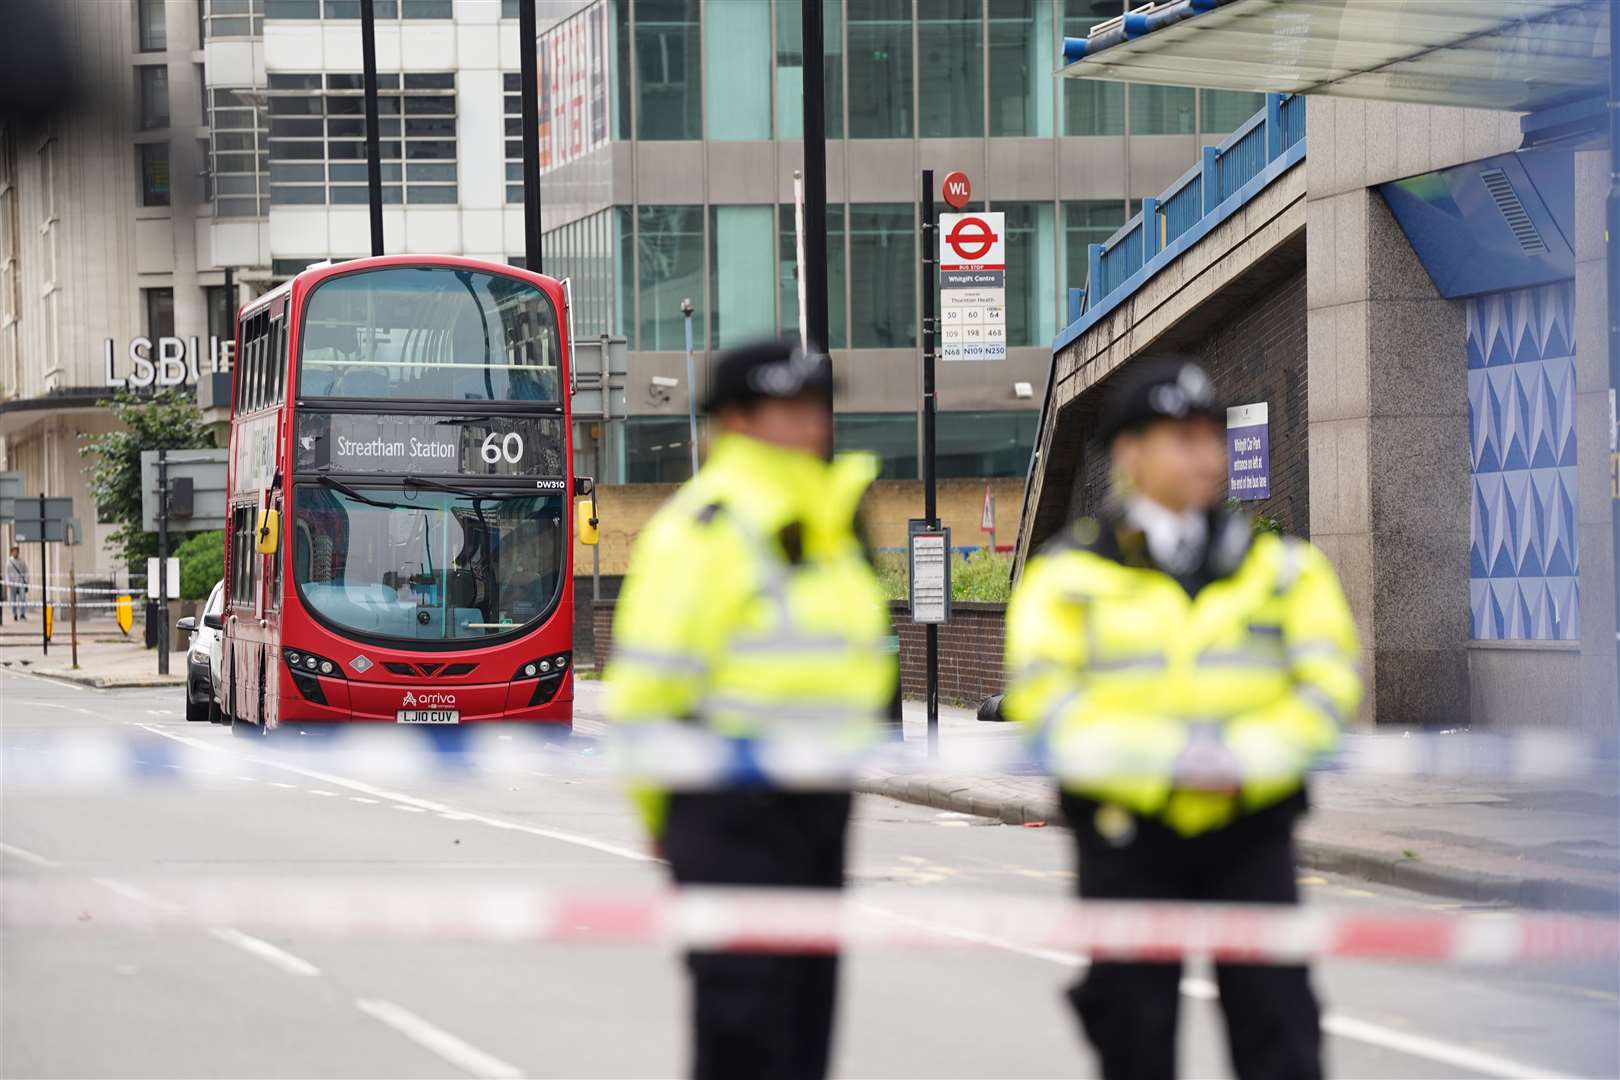 Police believe the attack happened near a bus stop rather than on a bus, a detective has said (James Manning/PA)